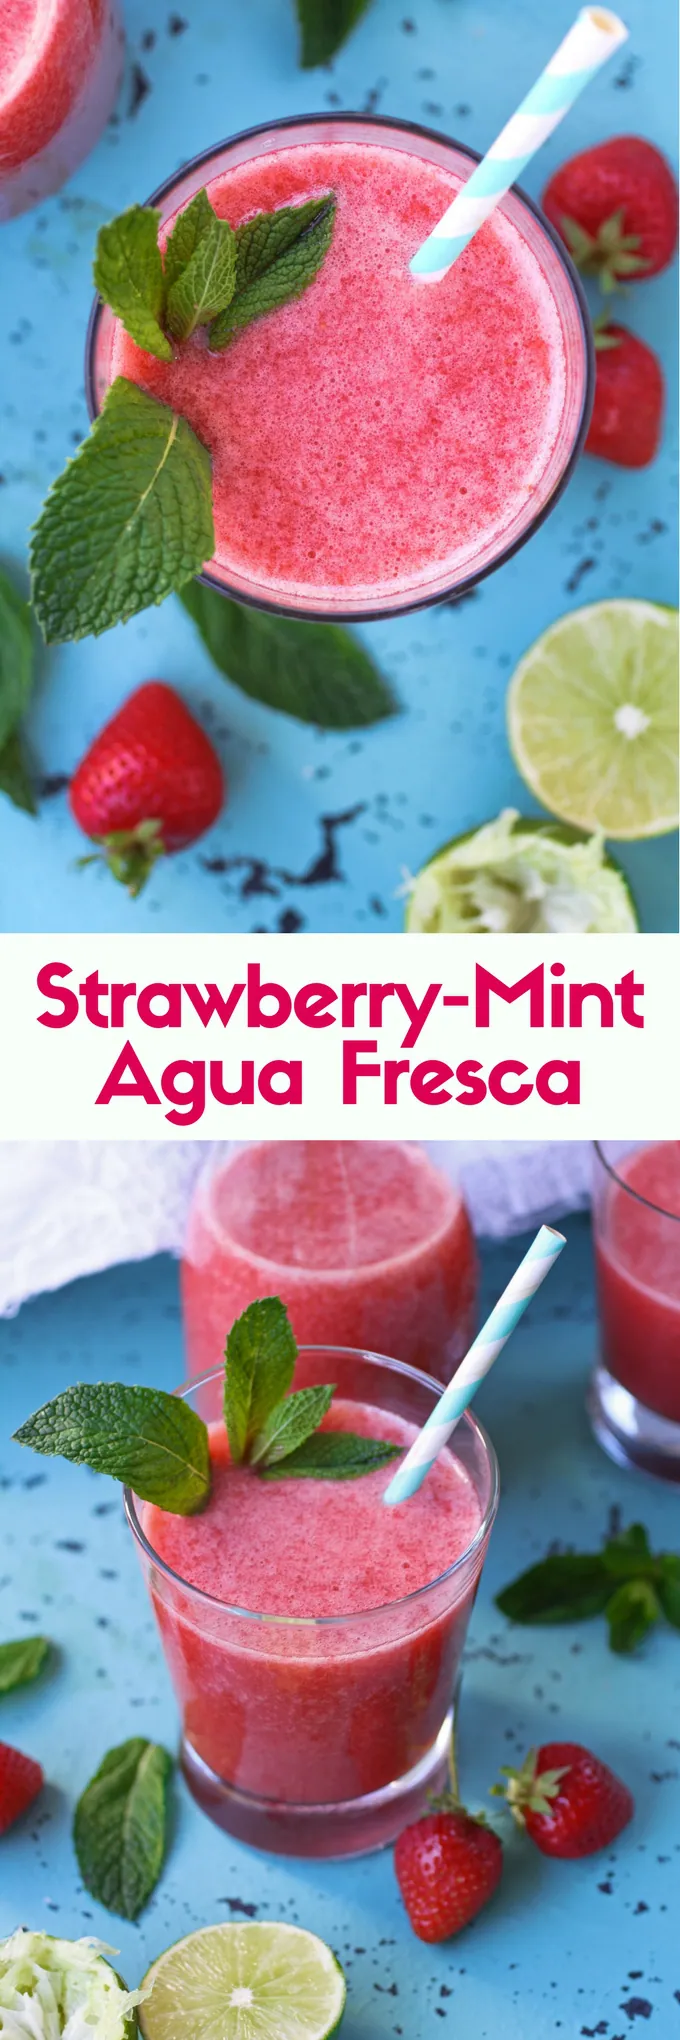 Strawberry-Mint Agua Fresca is filled with fresh fruit. You'll love this refreshing drink.